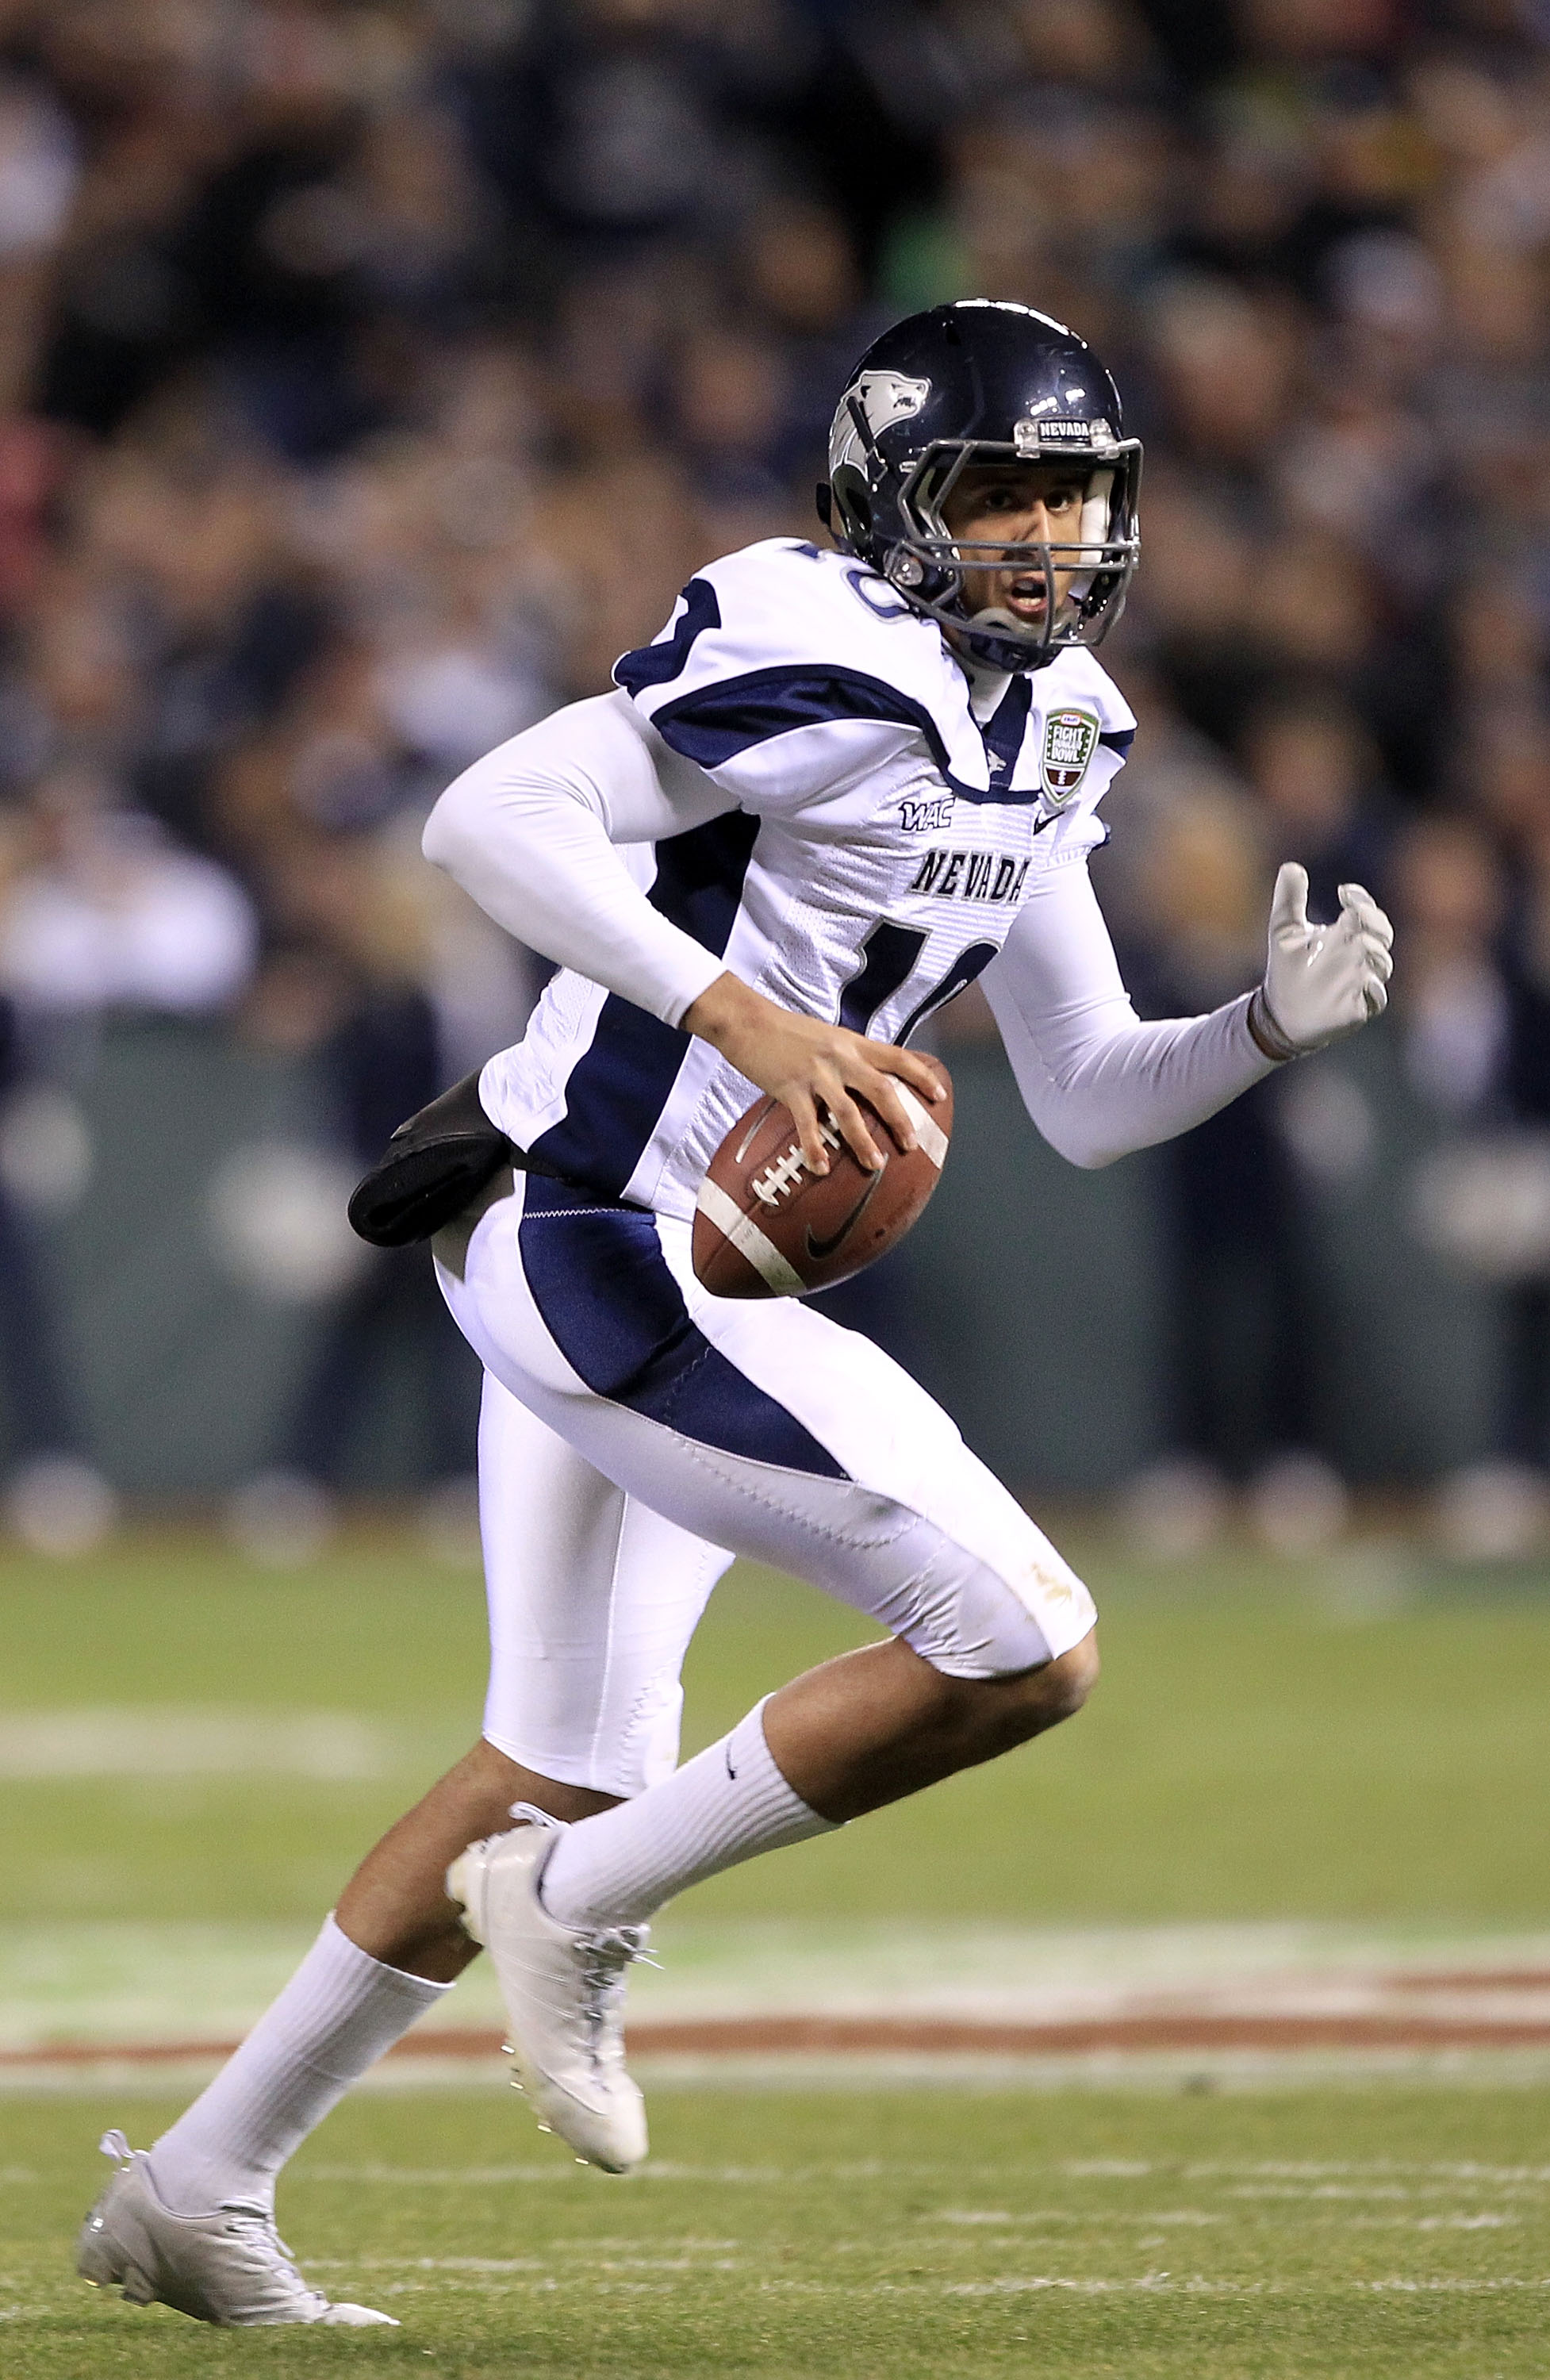 SAN FRANCISCO, CA - JANUARY 09:  Colin Kaepernick #10 of the Nevada Wolf Pack looks to pass the ball against Boston College during the Kraft Fight Hunger Bowl at AT&T Park on January 9, 2011 in San Francisco, California.  (Photo by Ezra Shaw/Getty Images)